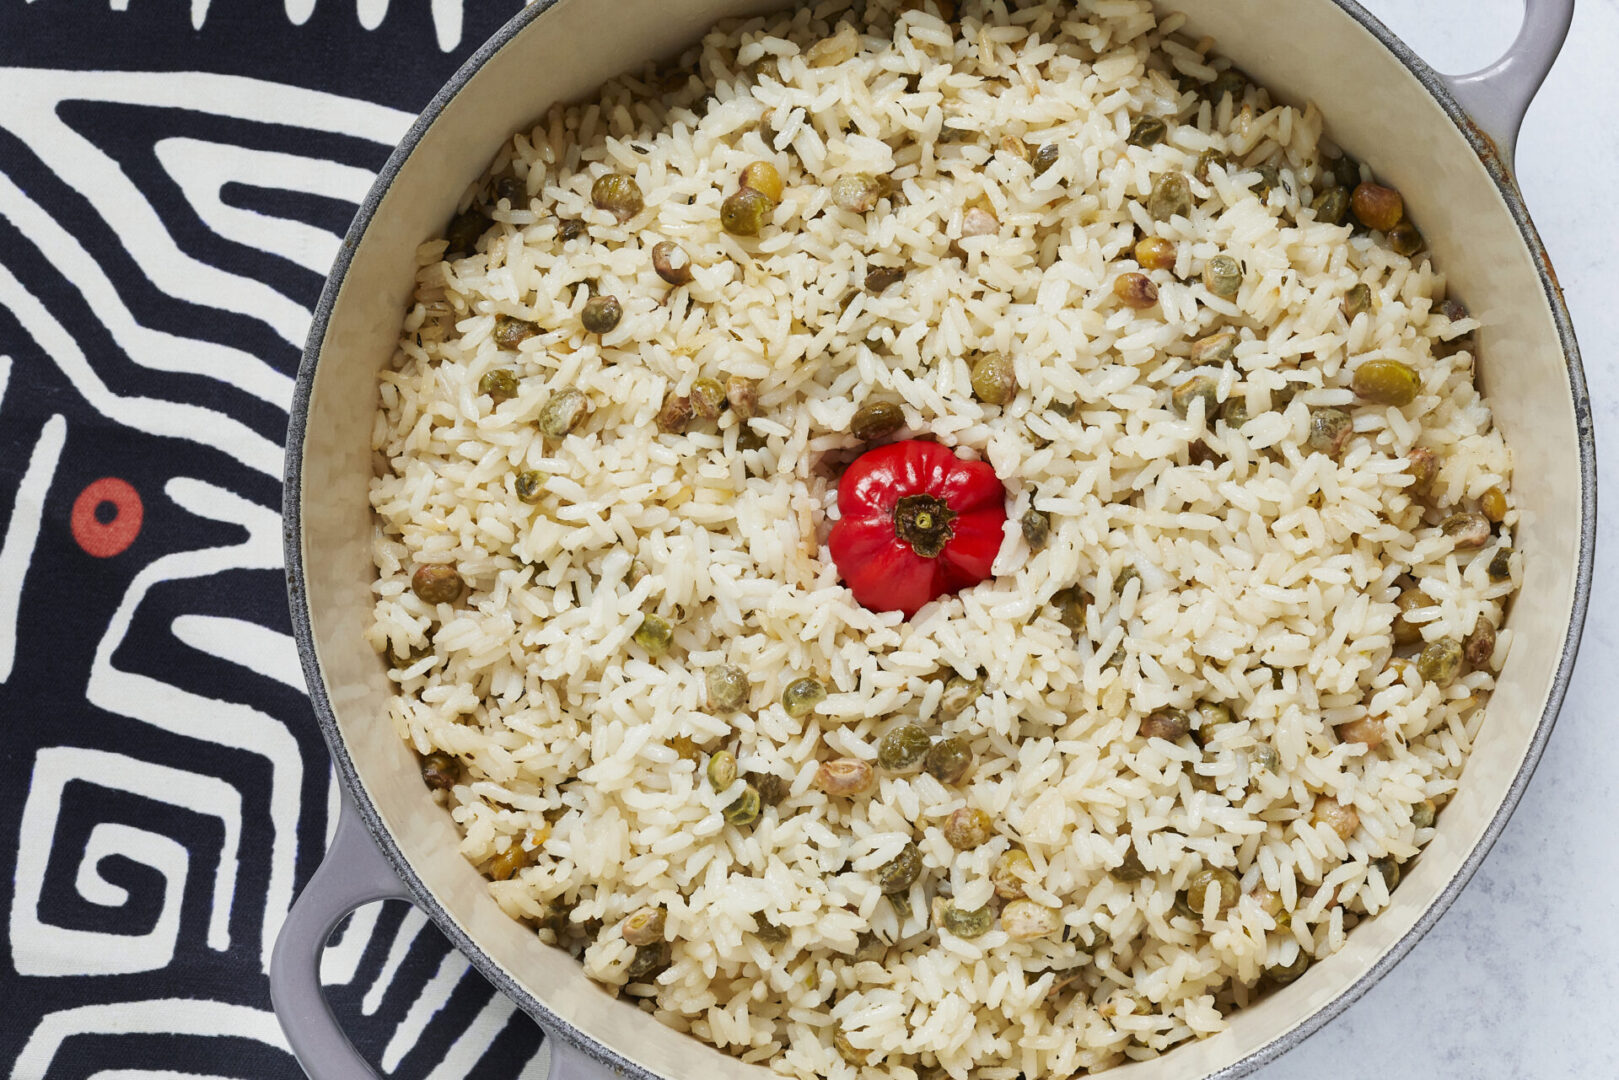 White rice tossed with green peas and chilli